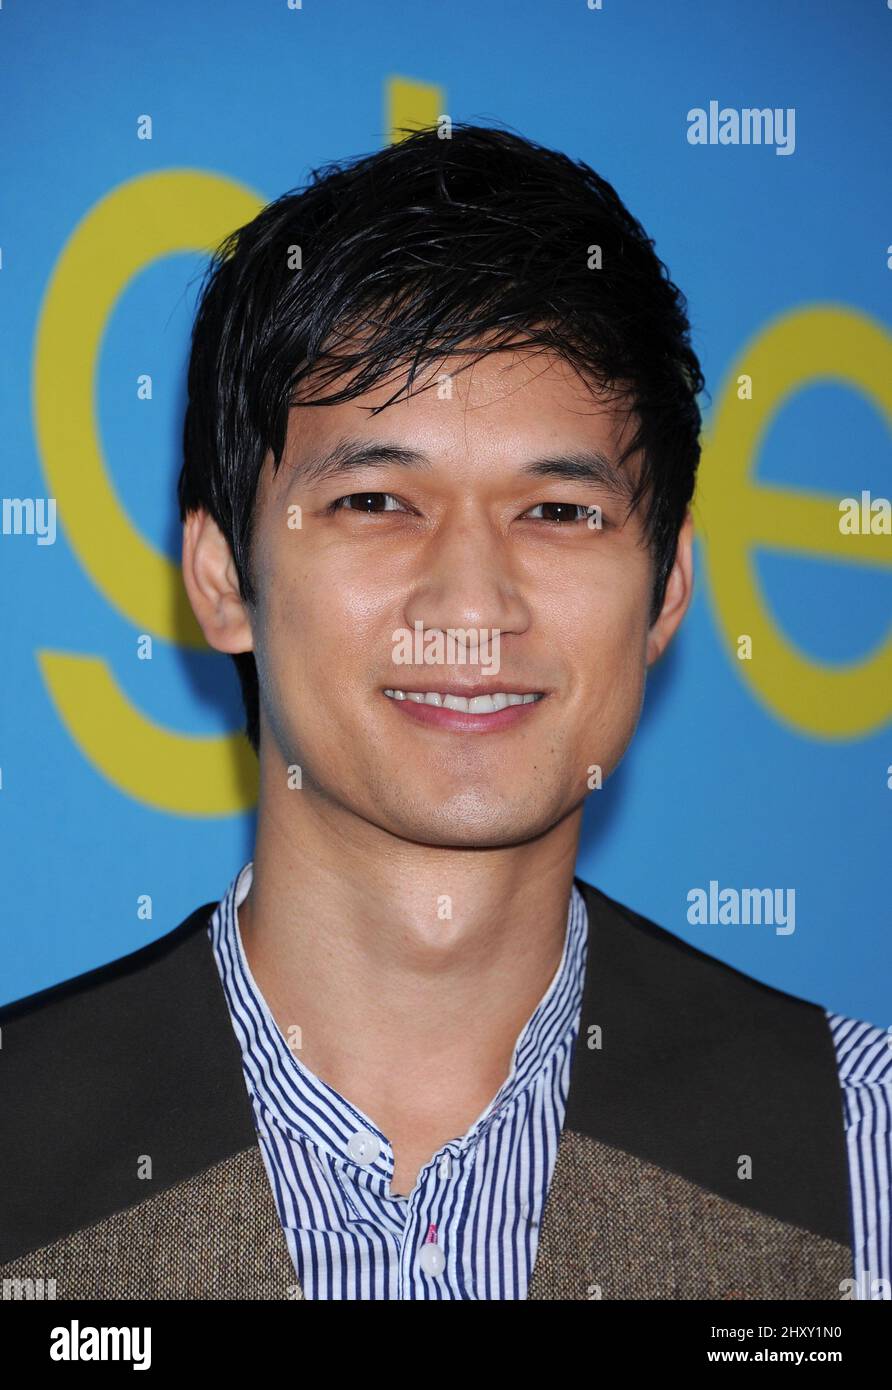 Harry Shum Jr. during the 'Glee' Television Academy screening and Q&A held at the Leonard H. Goldenson Theatre, California Stock Photo